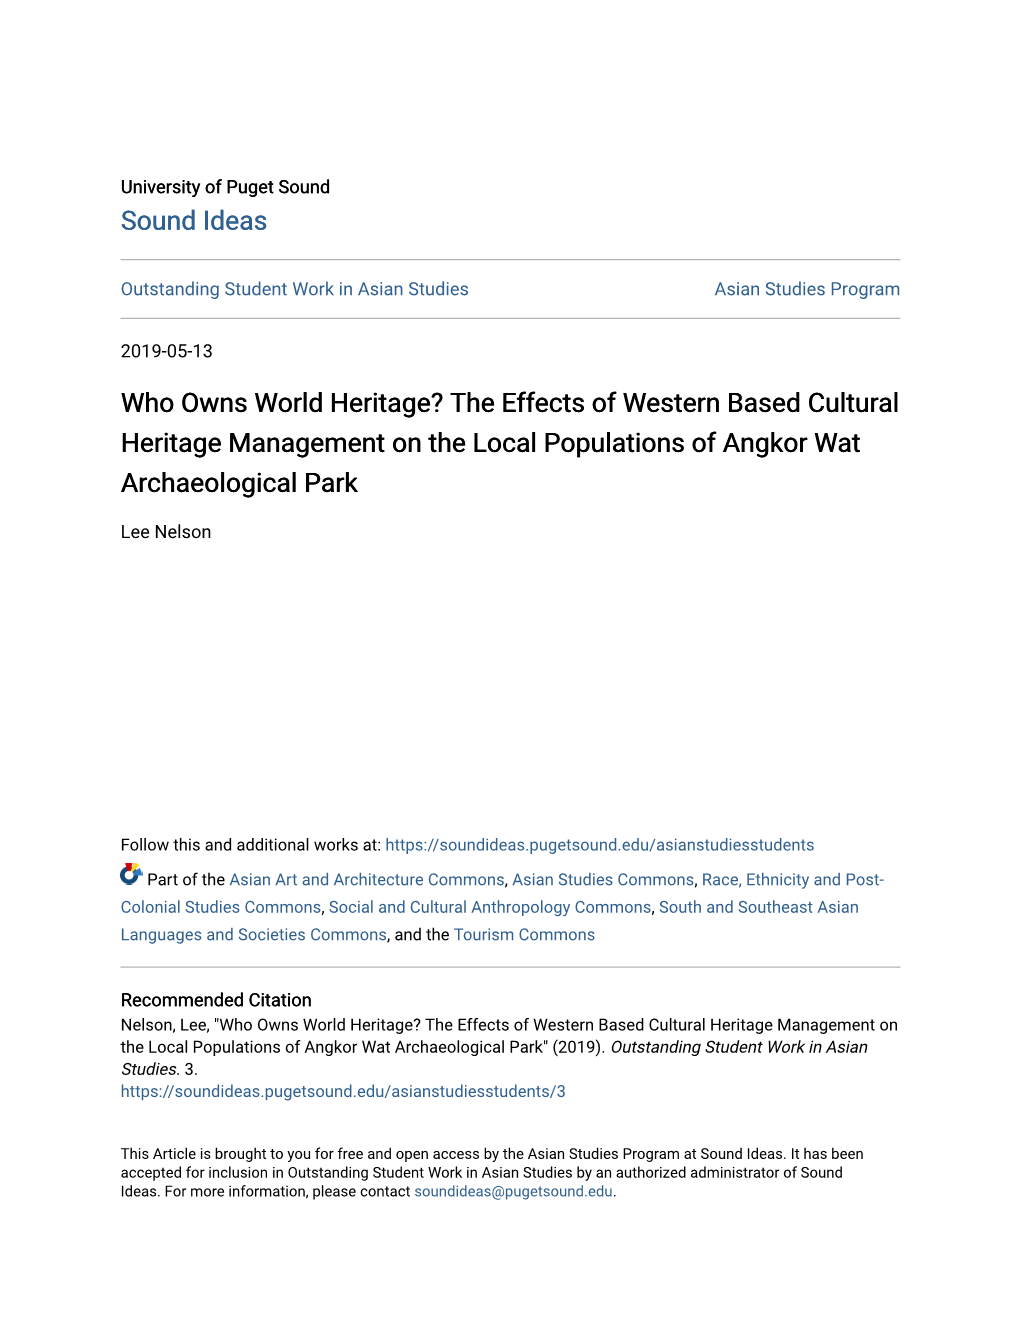 Who Owns World Heritage? the Effects of Western Based Cultural Heritage Management on the Local Populations of Angkor Wat Archaeological Park